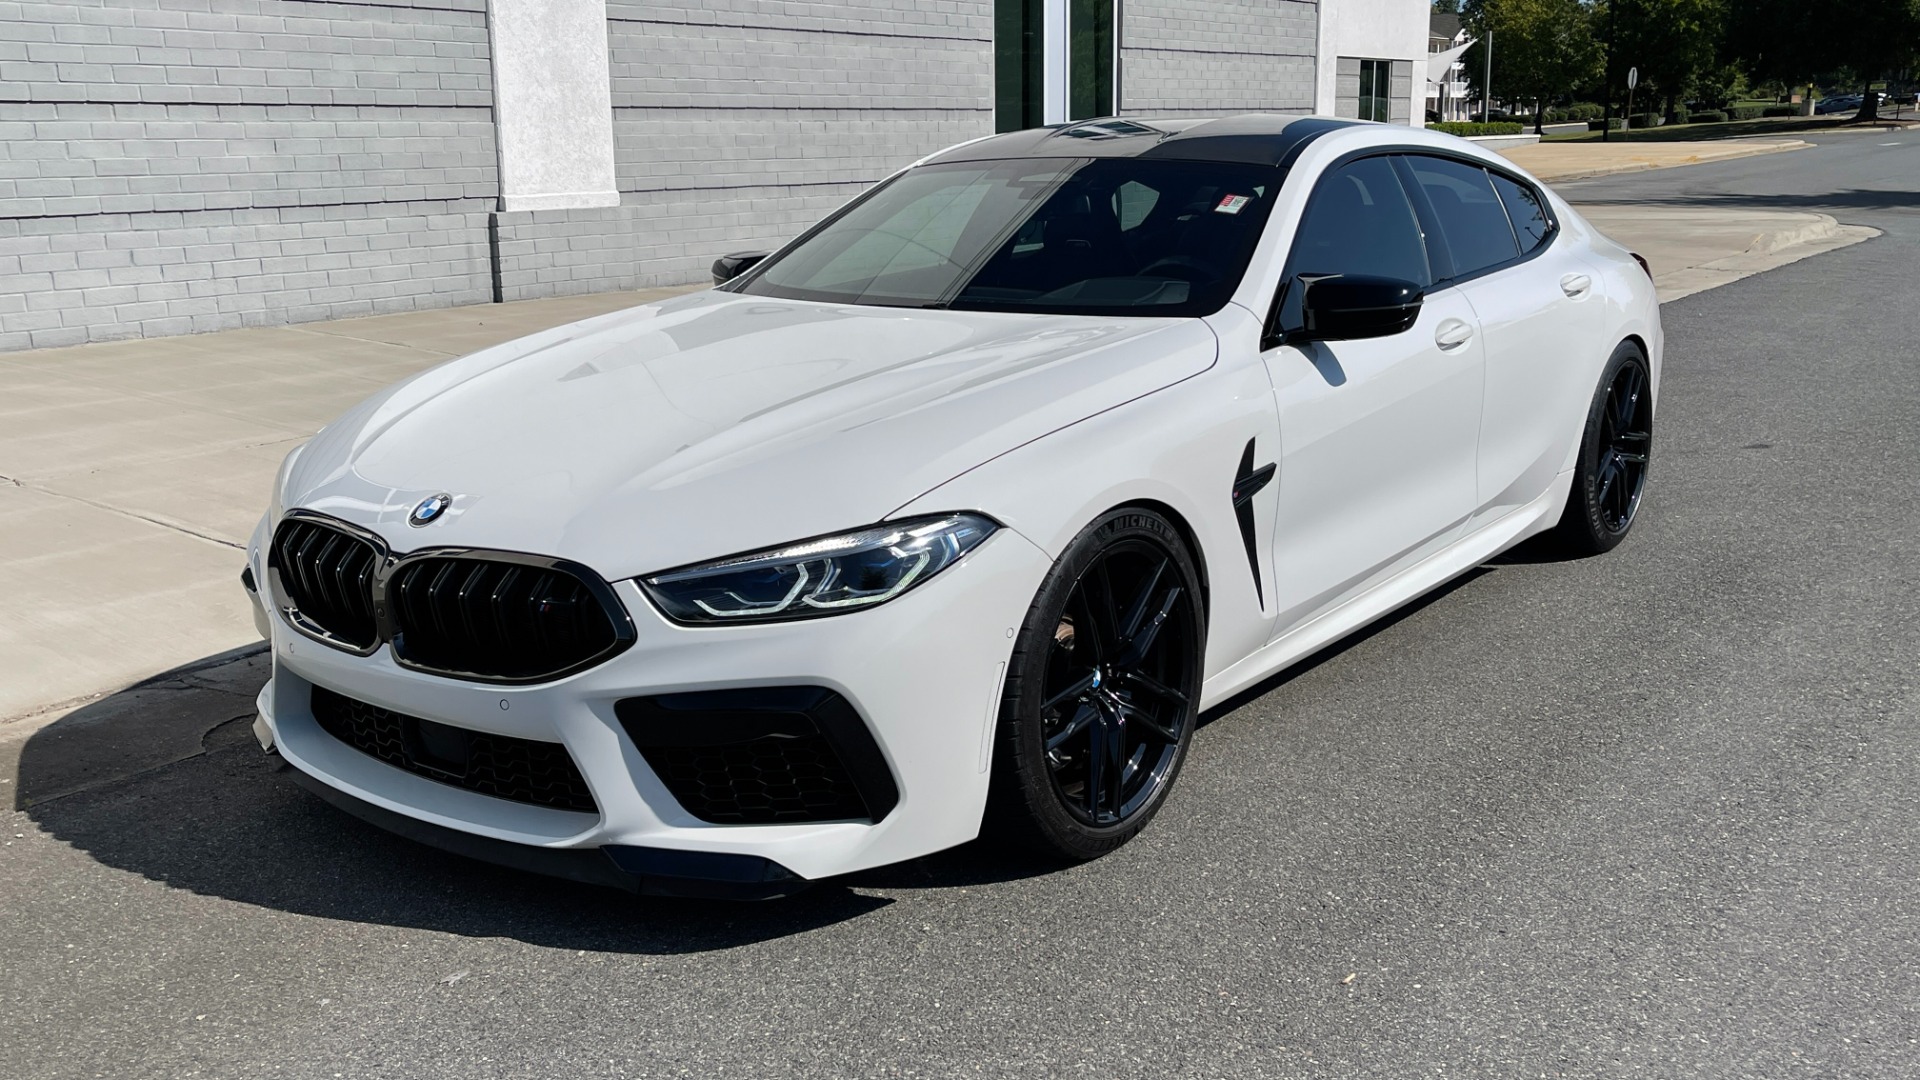 Used 2020 BMW M8 COMPETITON / TWIN TURBO / KW V3 SUSPENSION / FRONT LIFT / PPF / CERAMIC COA for sale Sold at Formula Imports in Charlotte NC 28227 2